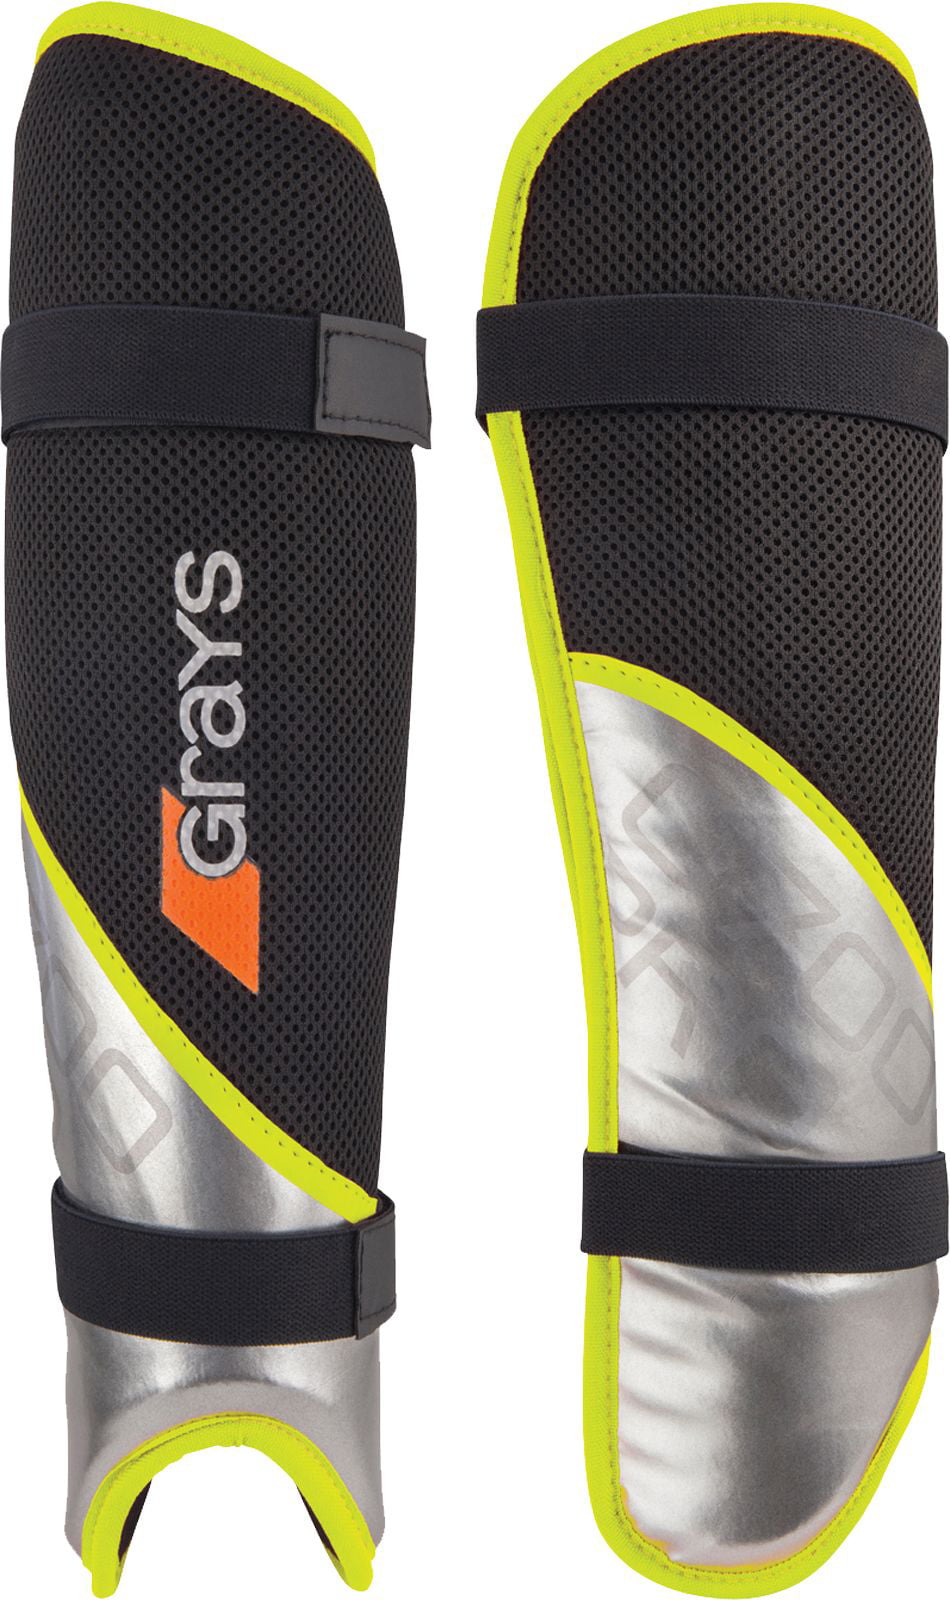 £20.00 Grays Hockey G700 Shin Guards Black/Silver Size Extra Large Adults RRP 